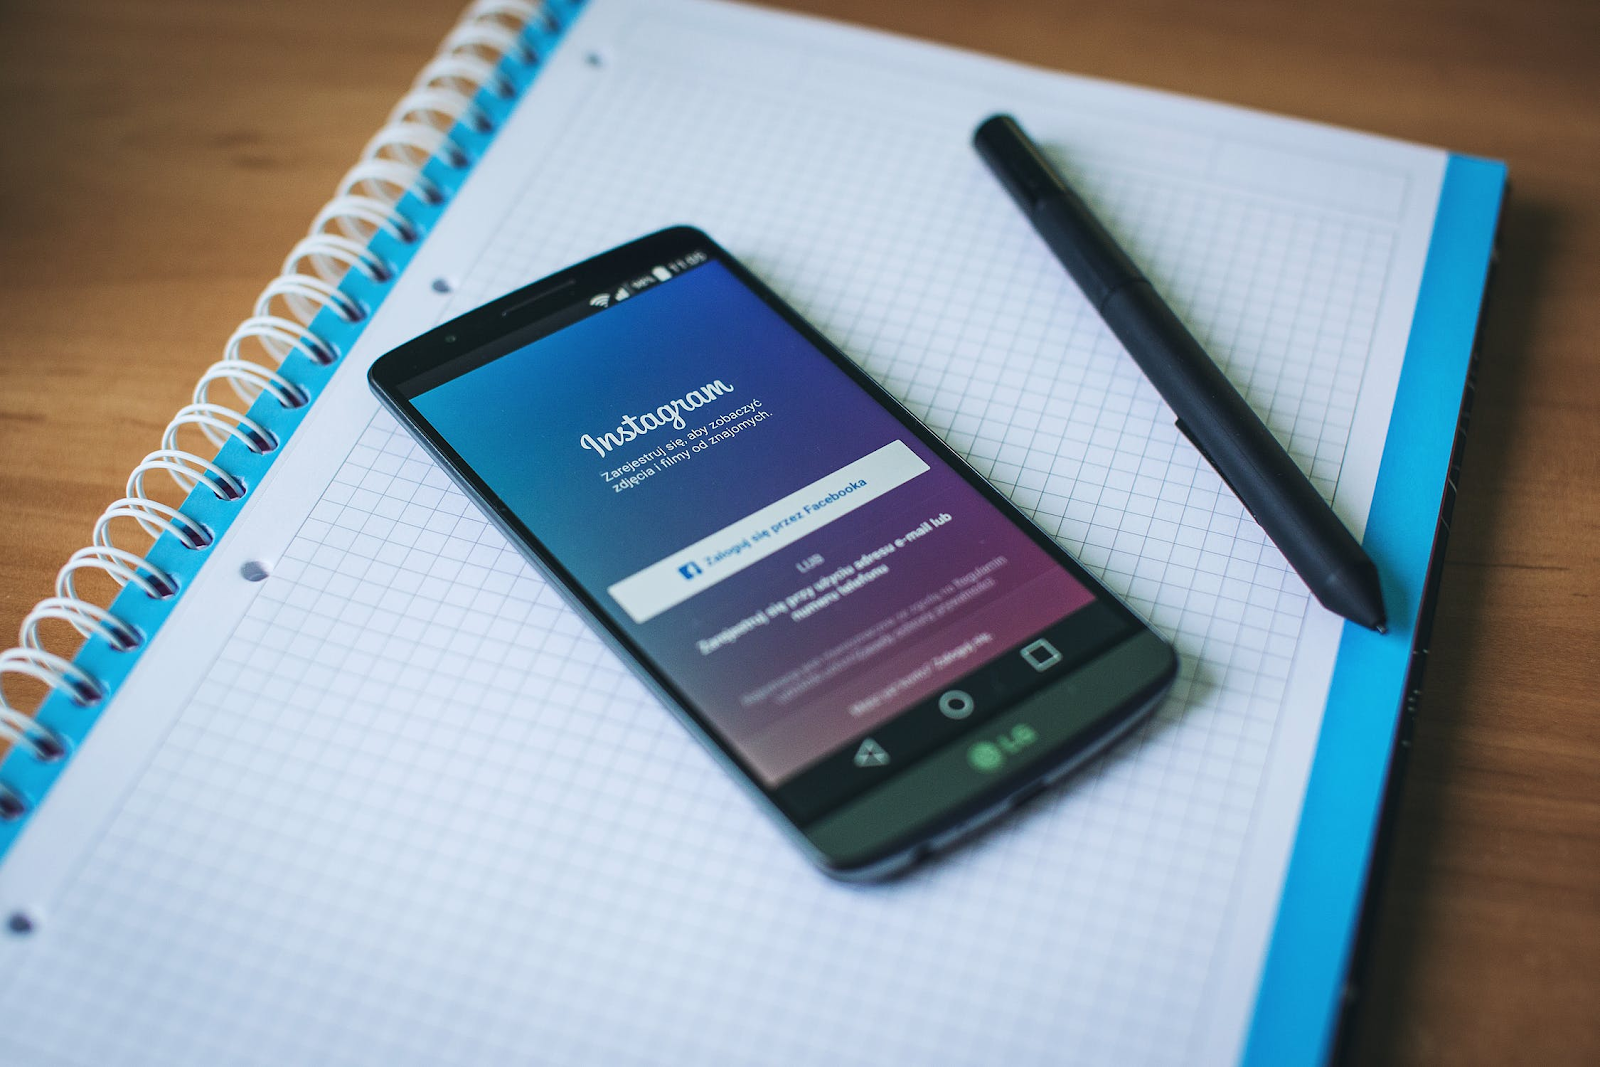 How to Use Instagram for Blog Marketing (Photo of Instagram for iPhone)